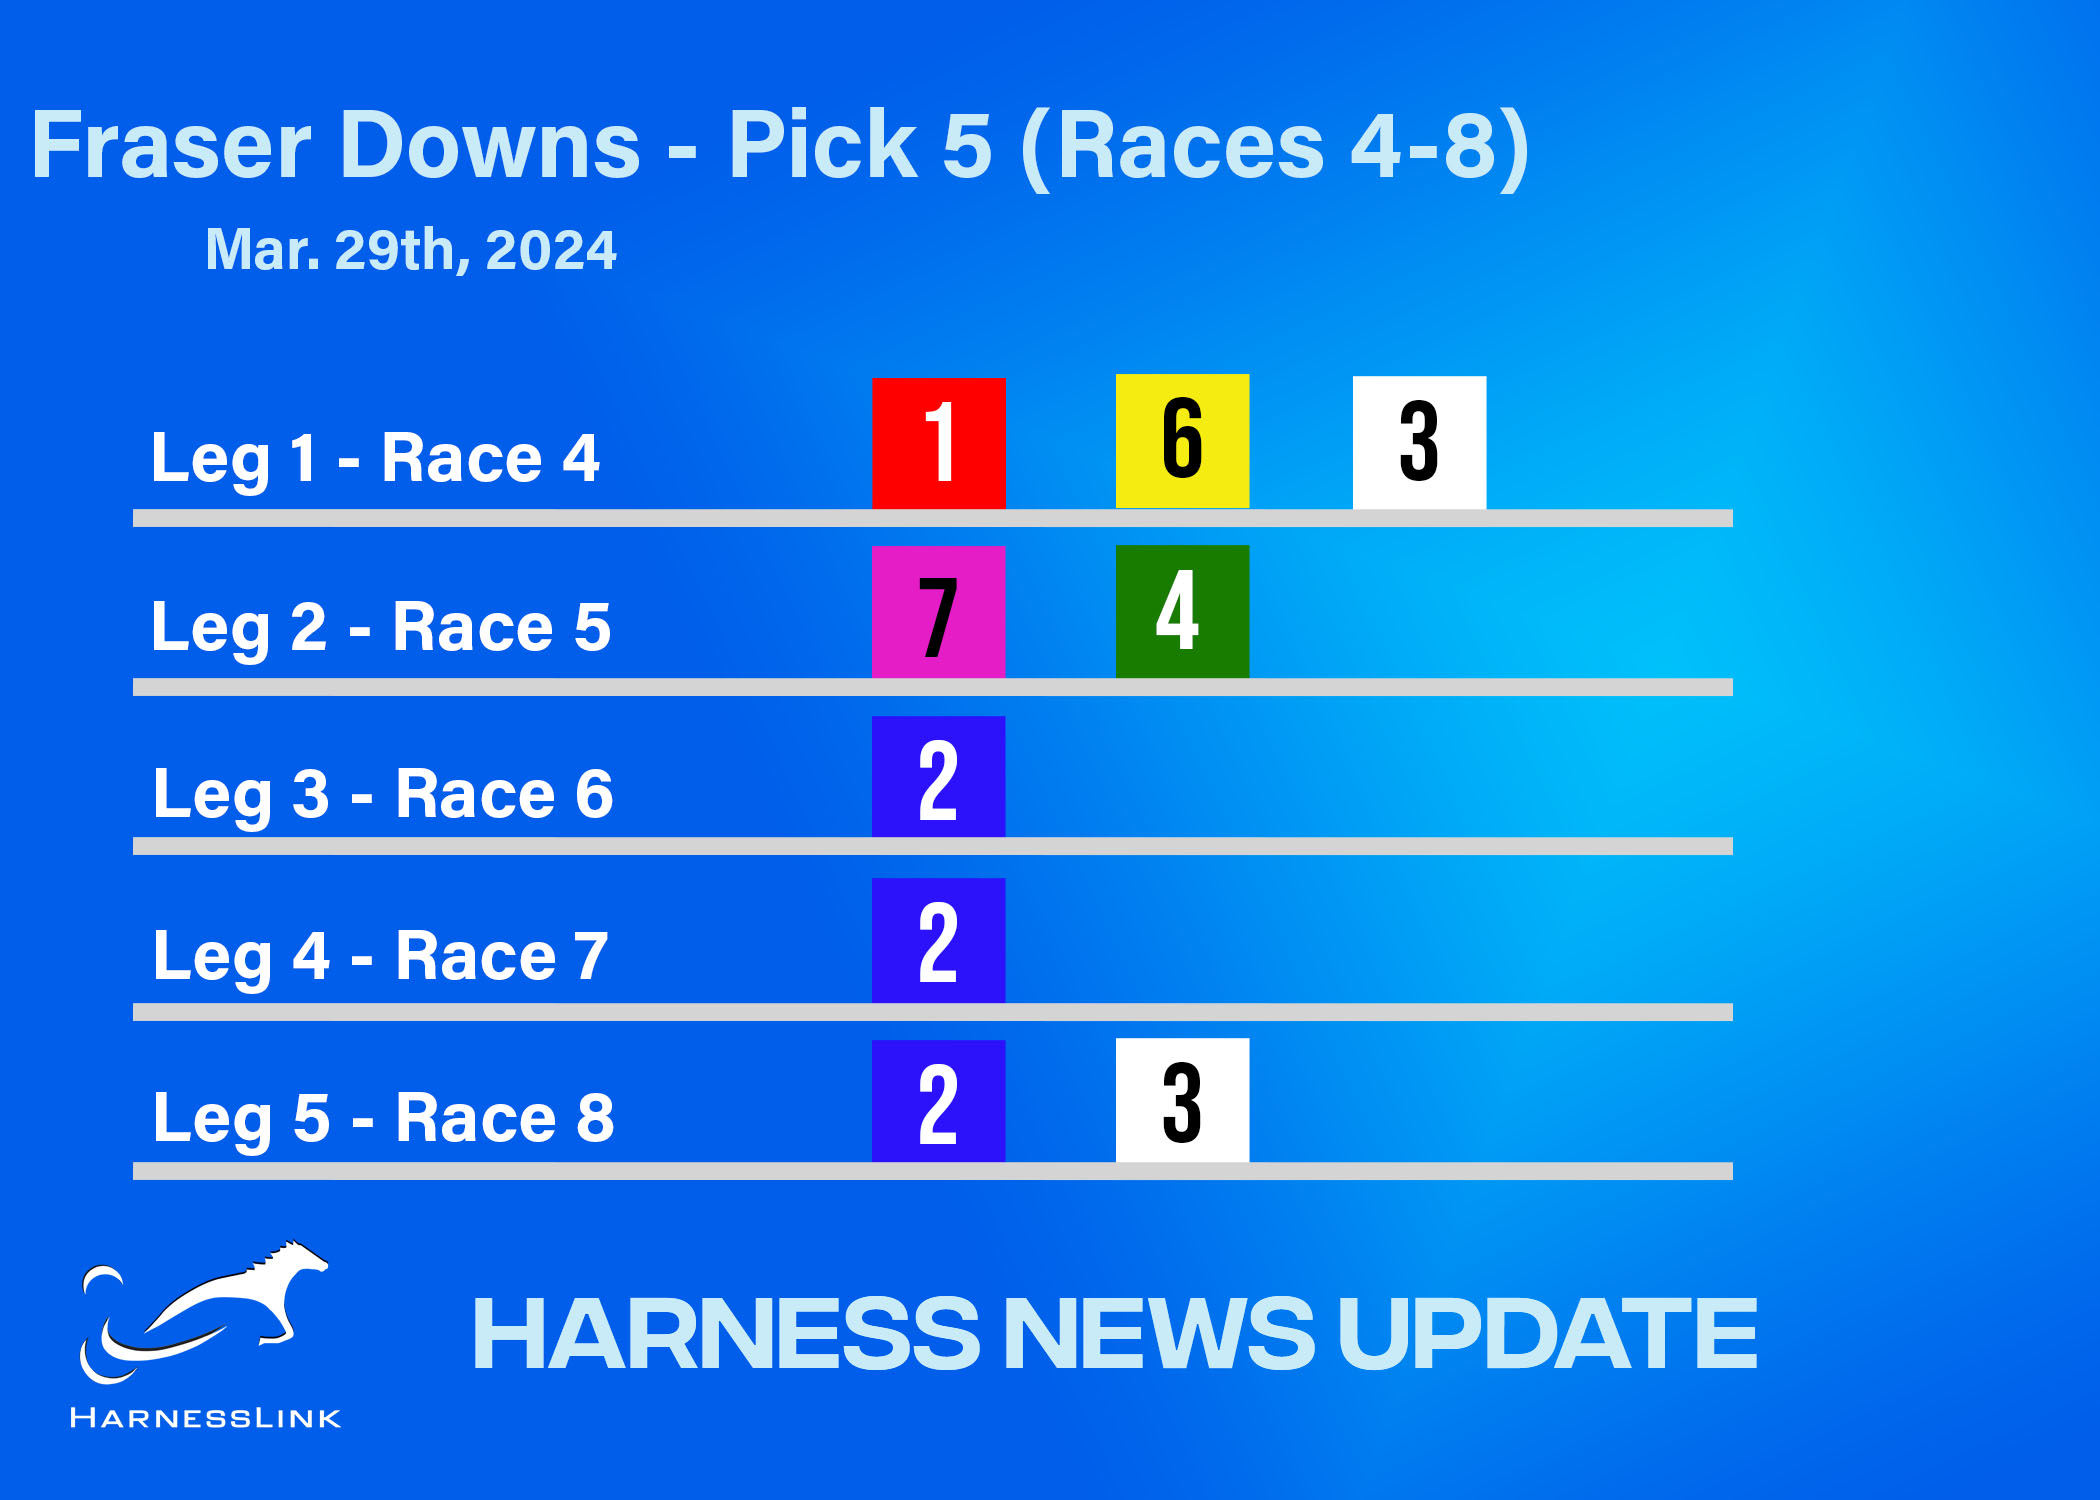 Harness News Update: Picks and analysis for Fraser Downs March 29th